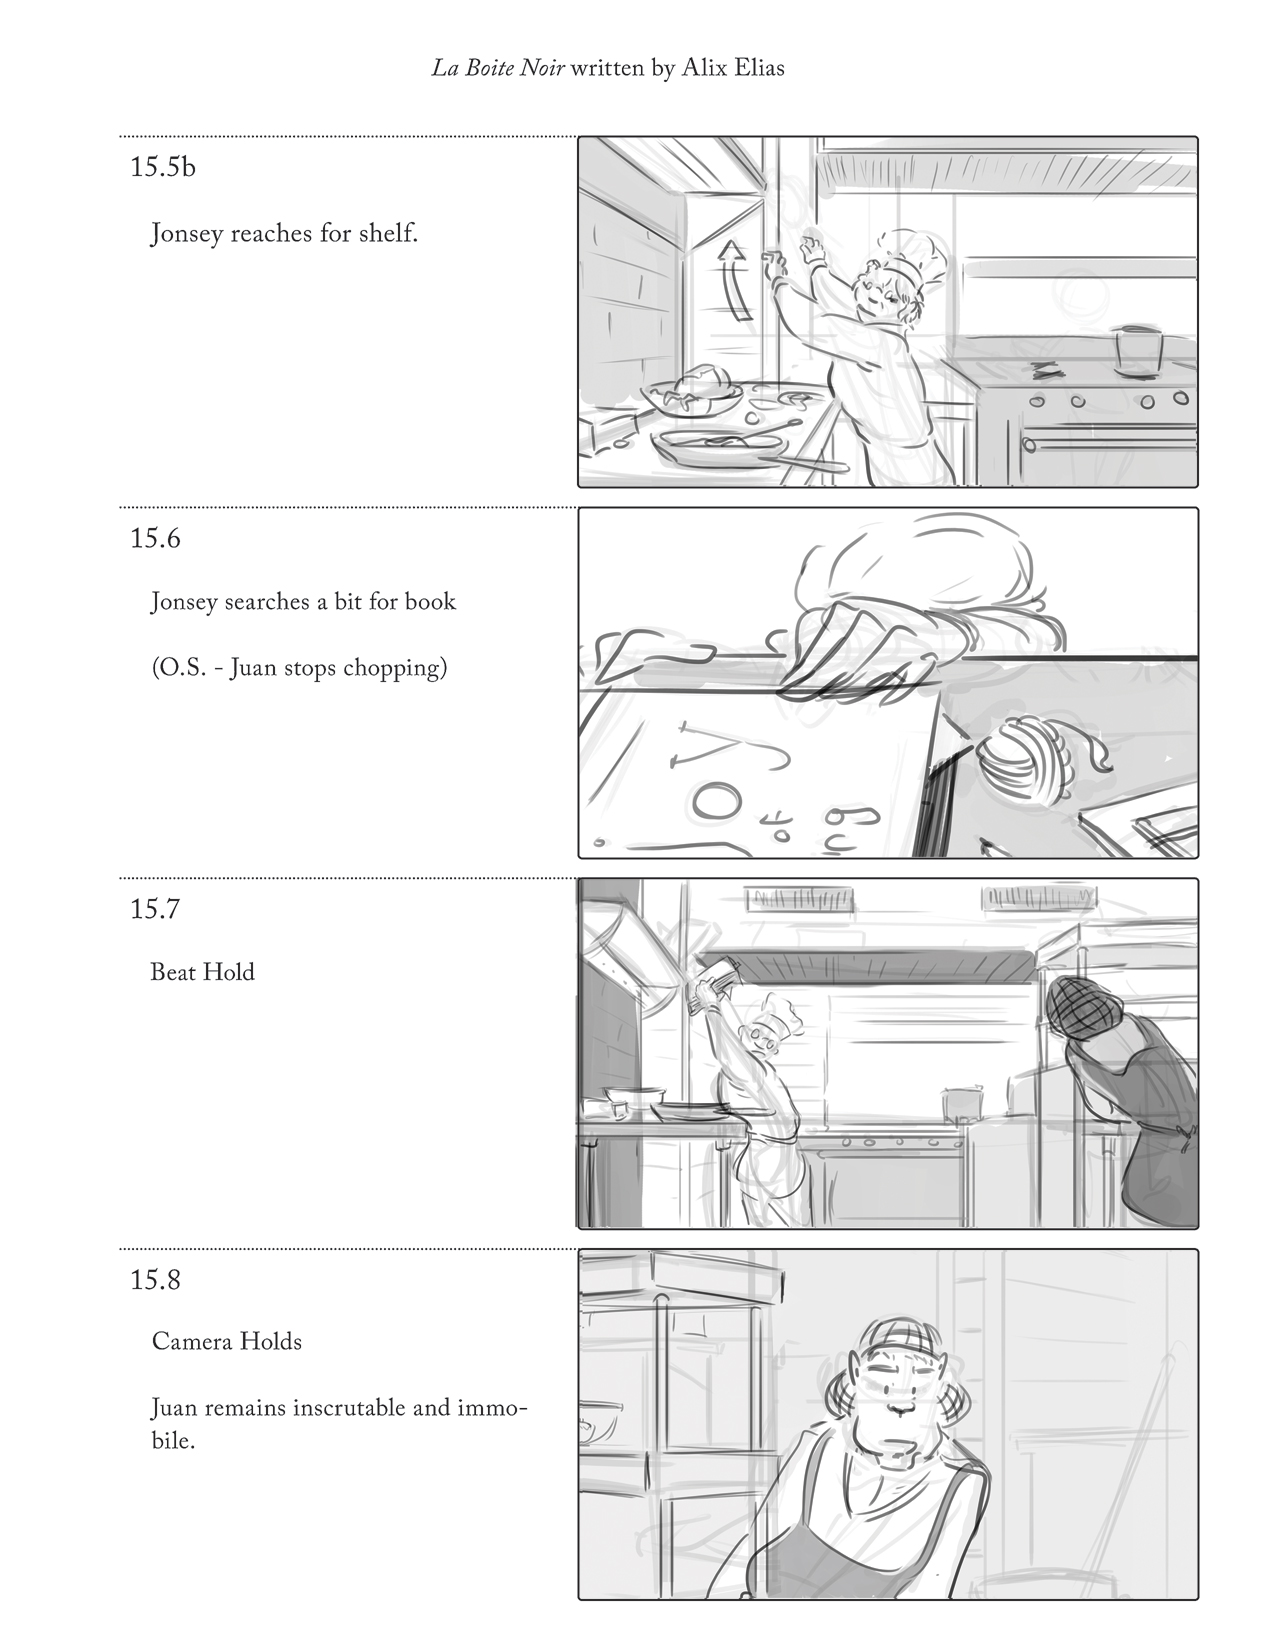 All-live-action-storyboards-with-new-vertical-format-15